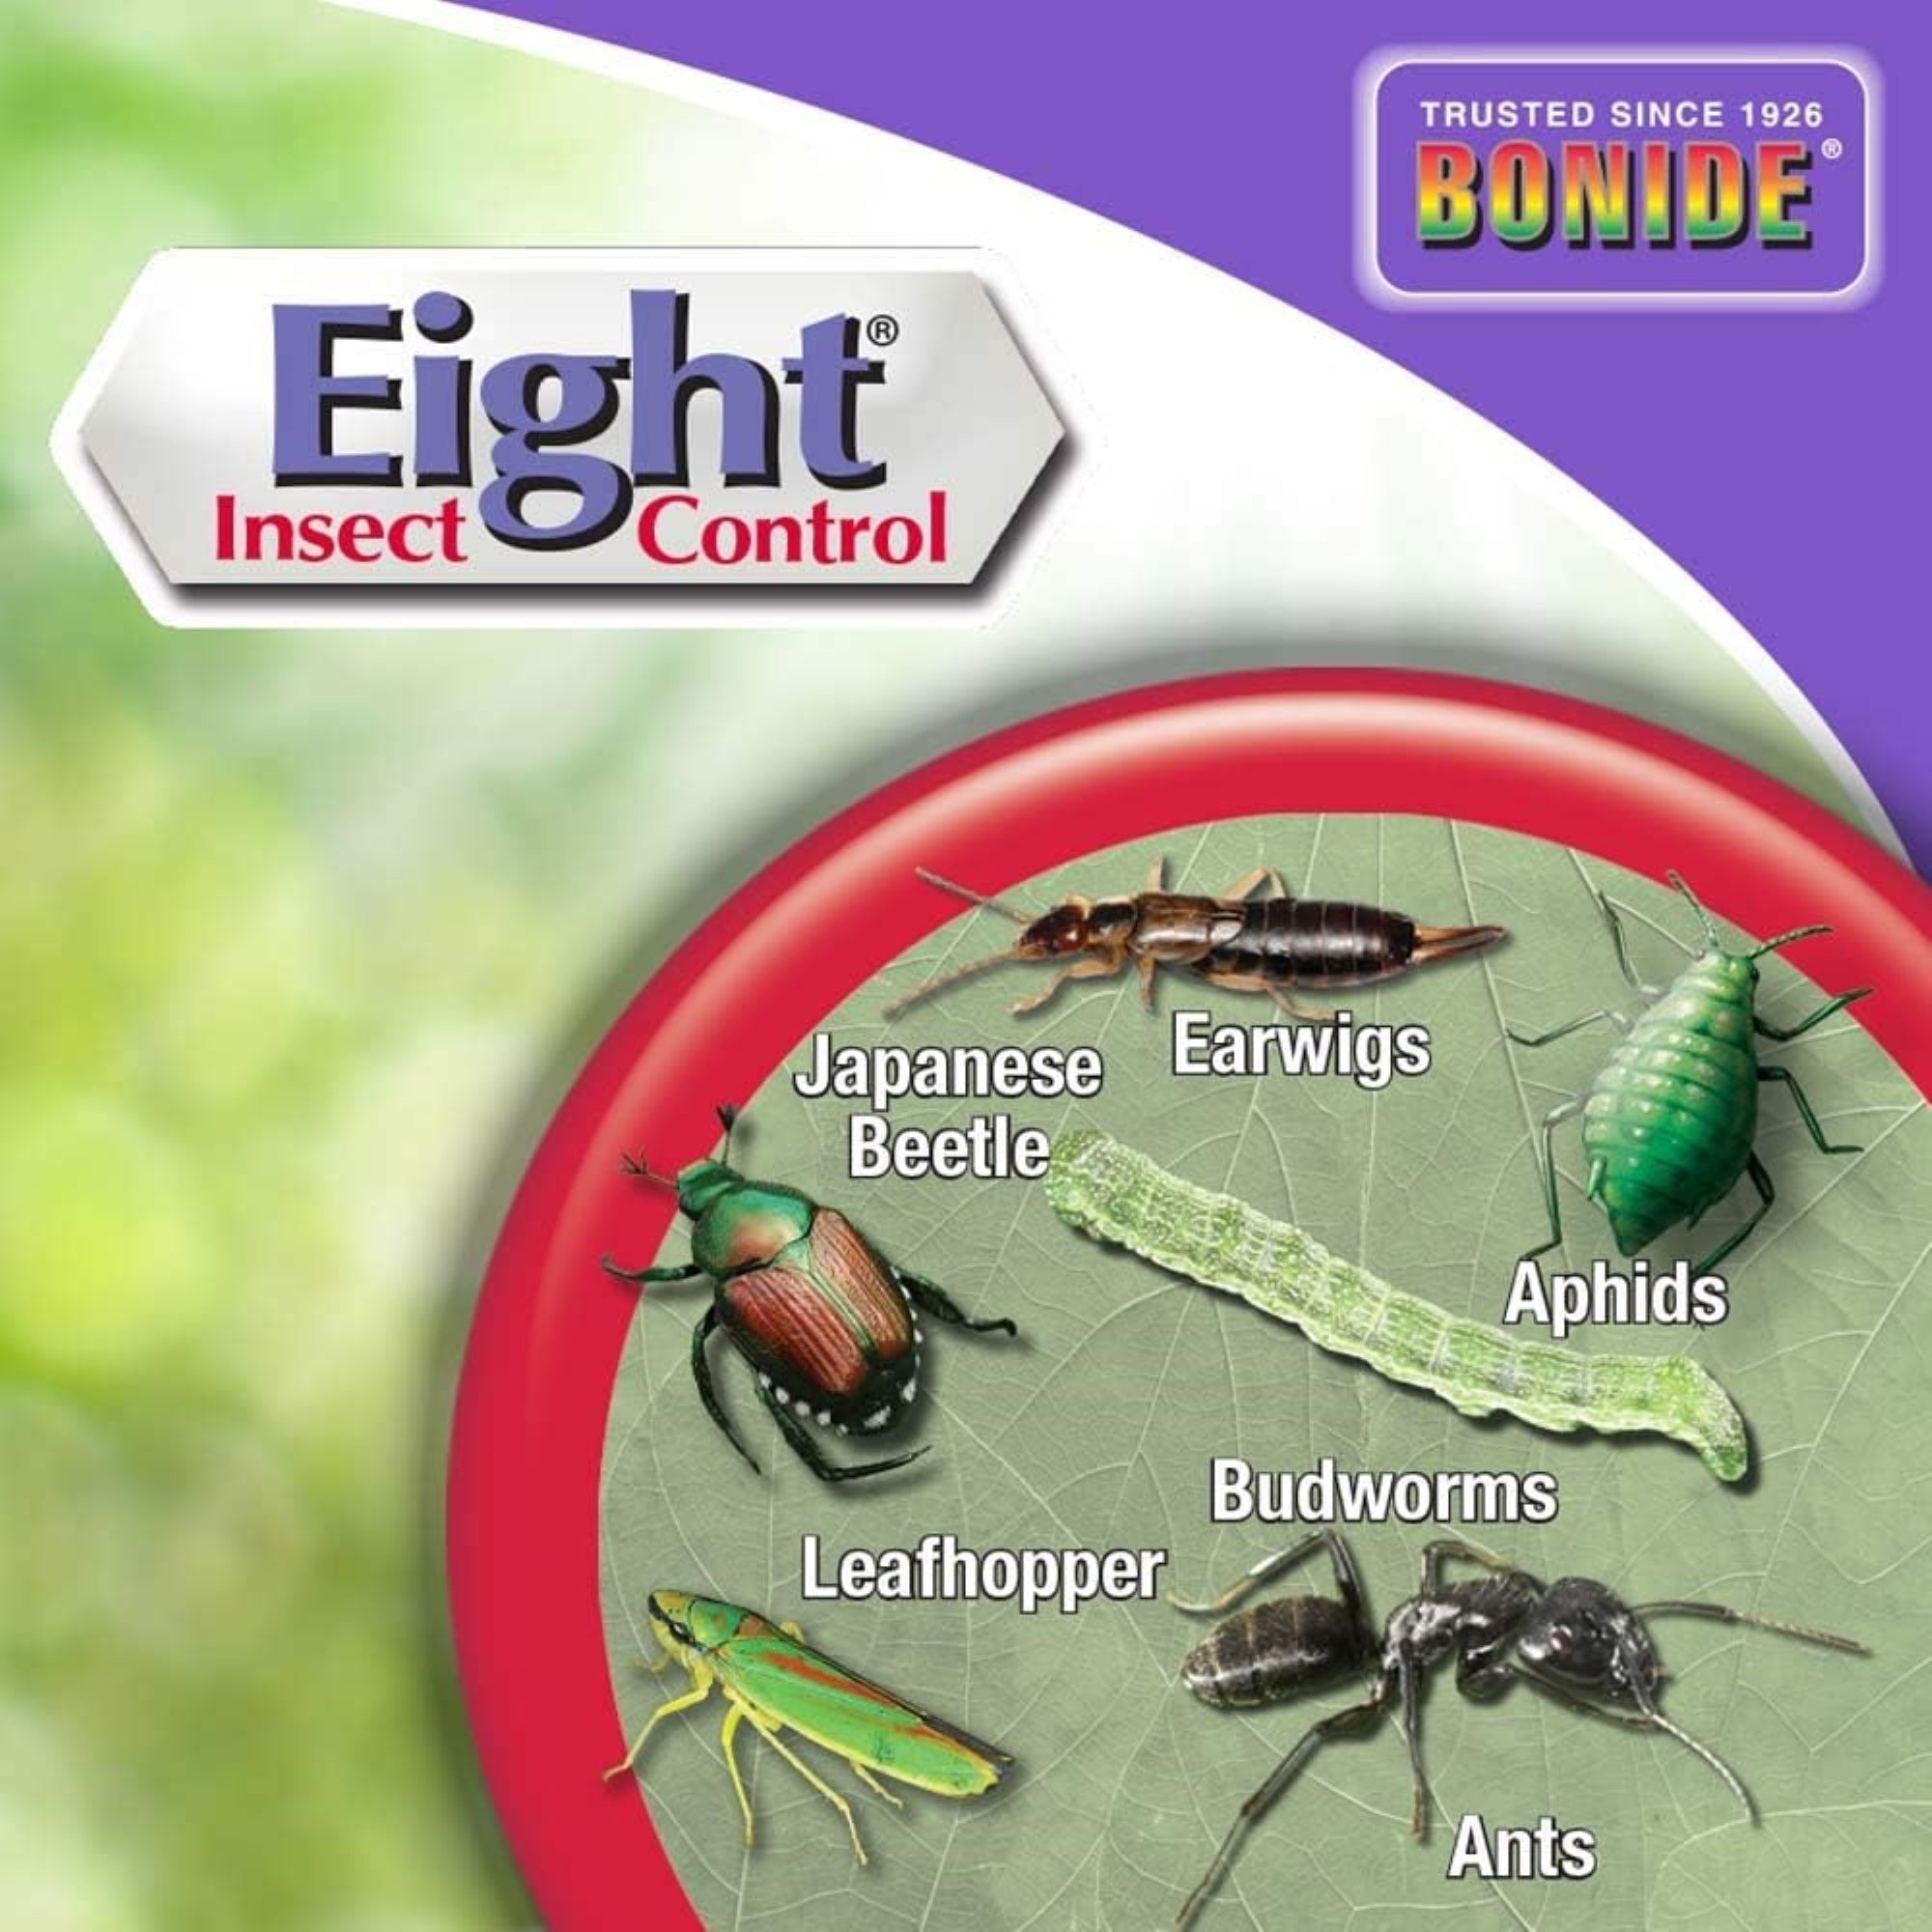 Bonide Eight Insect Control Garden & Home, Ready-to-Use with Sprayer, Insecticide for Outdoors, Kills Beetles, Aphids, Ants, 128oz